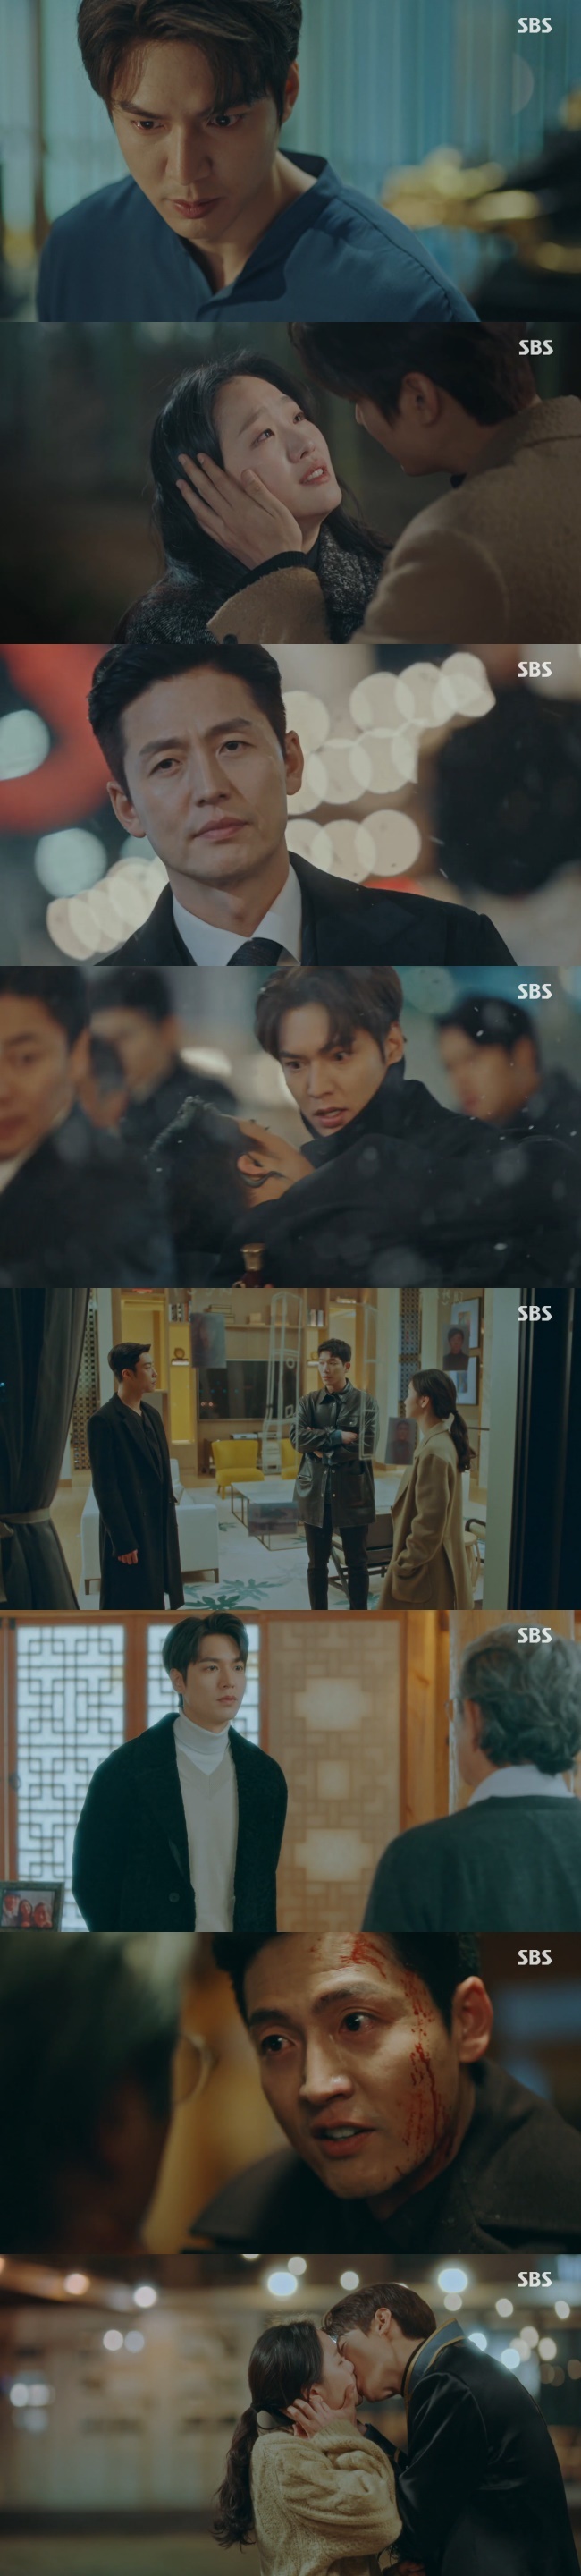 Lee Min-ho heralds full-scale fight with Lee Jung-jinLee Min-ho met Lee Jung-jin in the 10th episode of SBSs Golden Land Drama The King: The Lord of Eternity (playplayed by Kim Eun-sook/directed by Baek Sang-hoon and Jung Ji-hyun) on May 16th in 25 years at Korean Empire.Jeong Tae-eul (Kim Go-eun) went to the bamboo forest, drawing a picture of Igon who left for Korean Empire.Jung Tae-eul ran to Igon and cried in his arms, I really wanted to see you so much that I was going to die.I want to call you from a public phone. After that, I had a short meeting with Jung Tae-eun.Fortunately, Igon, who returned to Korean Empire within the time, held a New Years ceremony safely.Koo Seo-ryeong (Chung Eun-chae) asked Noh Ok-nam (Kim Young-ok) about Lees ideal type and asked what the heart of Lee Gon was broken by.I usually ask what my heart is going to beat, but what will break it, said Nooknam. How violent is this love? Has the King ever cried before the prime minister?Thats why I dont help the former prime minister, he said firmly.Igon had the Imperial House of Japan Guards guarded the bamboo forest for 17 days, but he did not find any trace of it.Leeon shared the fact that he appeared directly in Haeundae through the Imperial House of Japan SNS, which led to the appearance of Leerim.As expected, Irim appeared on the scene and the two did a bloody Daechi station.The Imperial House of Japan Guards of Igon appeared and when they pointed their guns at Irim, the Irim men appeared and threatened the citizens.The scene was momentarily shambles, and Cho Eun-seop (Udo-hwan) blew himself up and was shot on behalf of Igon.Irim watched and disappeared.Igon ordered the Imperial House of Japan Guards not to pursue the Irim and instructed them to stop all the footage on the scene at all costs.But the rumor that Irim appeared came to the ear of the old age, and Irim watched the situation comfortably, knowing that he could not explain his existence that he did not grow old for 25 years.What happened today is not the matter of Imperial House of Japan or the emperors individual, but terrorism, Lee said to the old man asking about the existence of Irim.As recorded in history, Irim was shot 25 years ago and 25 years later today I found his remnants and chased them. Jung Tae-eul traced the secret between Kang Shin-jae and Cho Young (Udohwan) and Korea Empire in earnest.Jung Tae-eul and Kang Shin-jae, who visited Jang Yeon-ji, who were imprisoned, intensively questioned what was in his 2G cell phone.The relatives visited Yi Jong-in (Jeon Mu-song) and encouraged him to take place with the remnants of the enemy because of the old age.Igon informed him that Irim was alive without old age and asked him to protect the palace on his behalf.Jung Tae-eul told Kang Shin-jae, who asked what Korean Empire was like, about the Korean Empire I had seen during the day.Kang Shin-jae, who took Jung Tae-eul to Lee Ji-hoons crypt, confessed that he came from Korean Empire.Kang said, You know why I became a detective. One day when someone asked me who you were, I wanted to have a gun in my hand.I was the reason you couldnt find me in the World, he said.Im not sure who I am yet, and Im not sure yet. Jeong Tae-eul was tearful of Kang Shin-jae.While Igon was away, Irim visited Yi Jong-in, who showed his ambition by putting the emperors ring in his hand.Yi Jong-in warned, We should not covet it. But Irim said, Brother and I can never be us.He who can stop his breath and who can be us right now. Irim announced his plan to kill Igon and take the mans power and have greater power.Cho Young, who was working with Jung Tae-eun, said, After catching the reverse, will you go back and forth to the two Worlds? Can you abandon everything here and become Empress of Korean Empire?I keep two World secrets and forever, he said.The disturbed Jeong Tae-eul returned home and watered the flowers he had bought from the Korean Empire, and missed him.I thought I didnt give her a flower, so I crossed the universe, Igon said. I didnt work. I love you. A lot.I love you, he said, and kissed Jung Tae-eun.Lee Ha-na